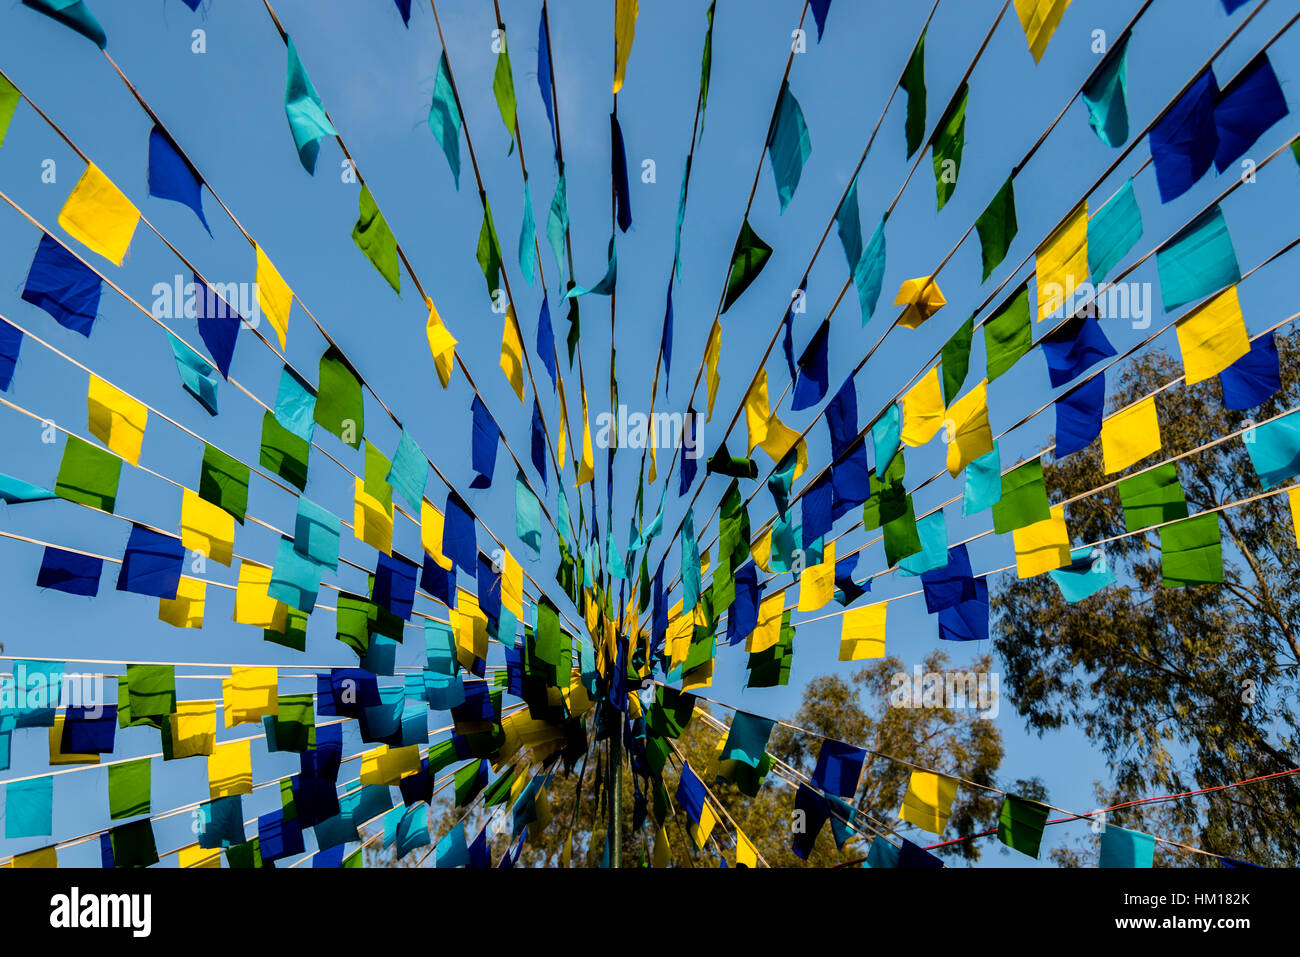 Beautiful colorful flags decoration during a Buddhist festival in India. Stock Photo